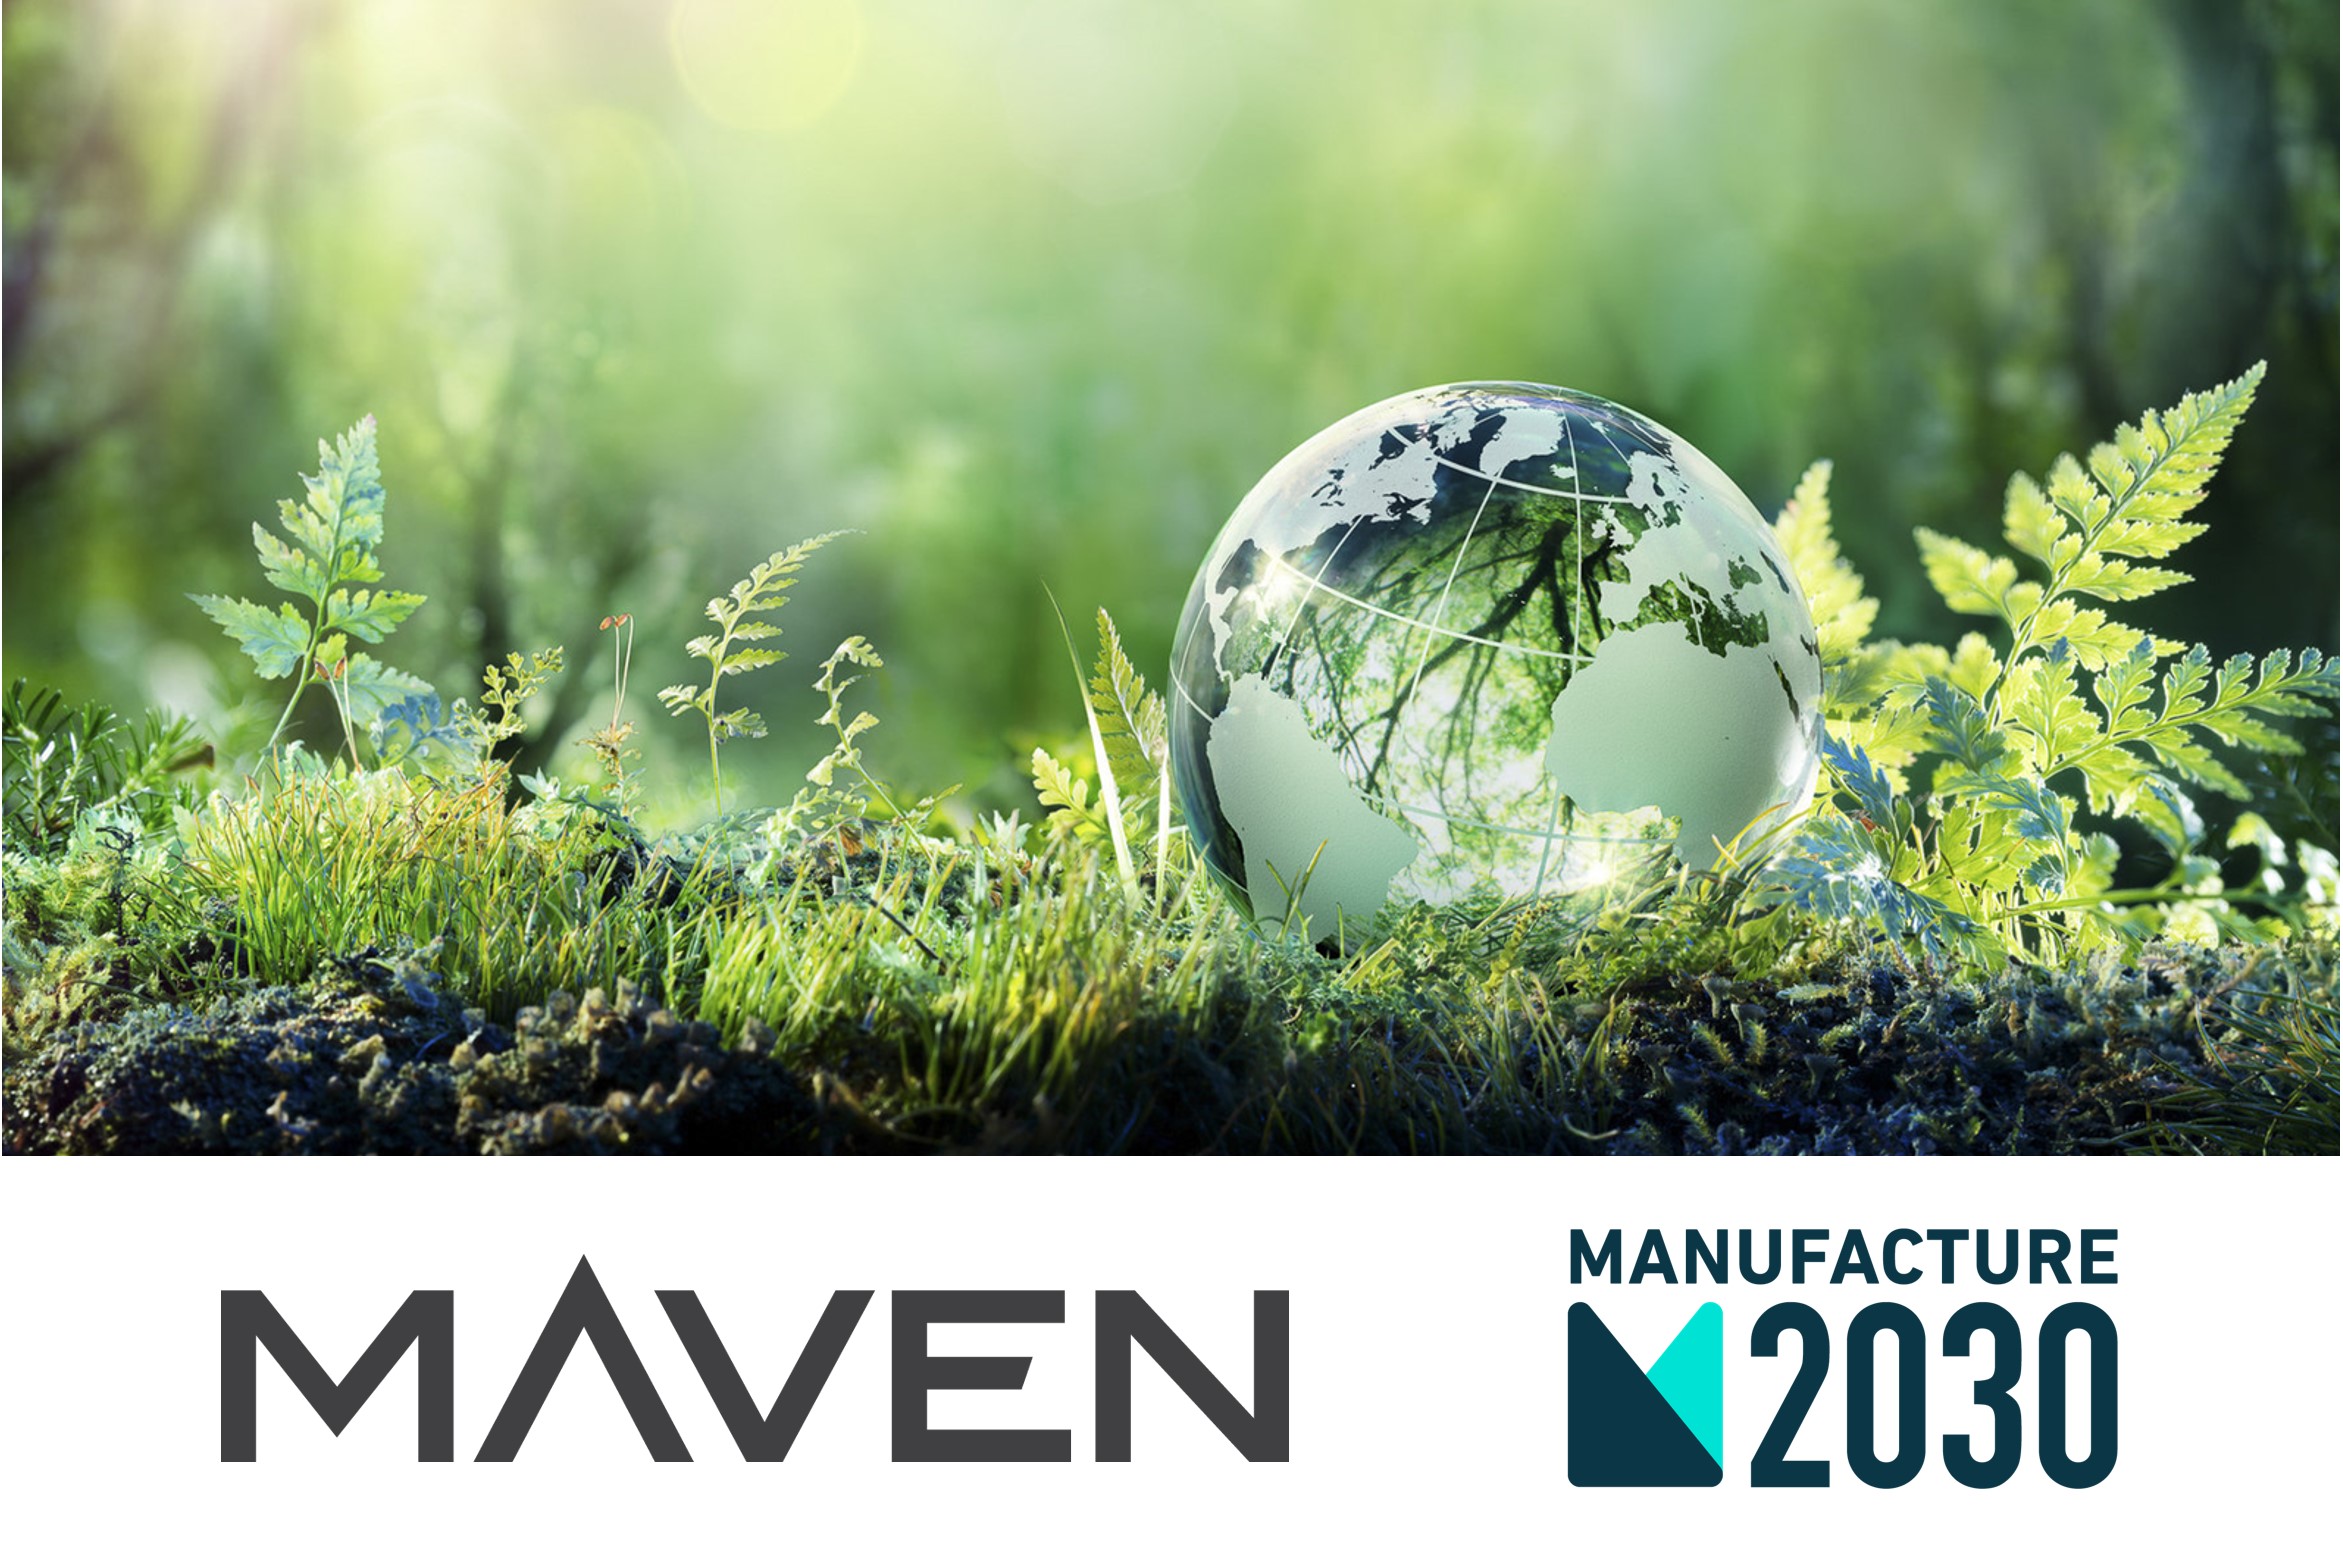 Luminii provides CDD support to Maven on their investment in Manufacture 2030